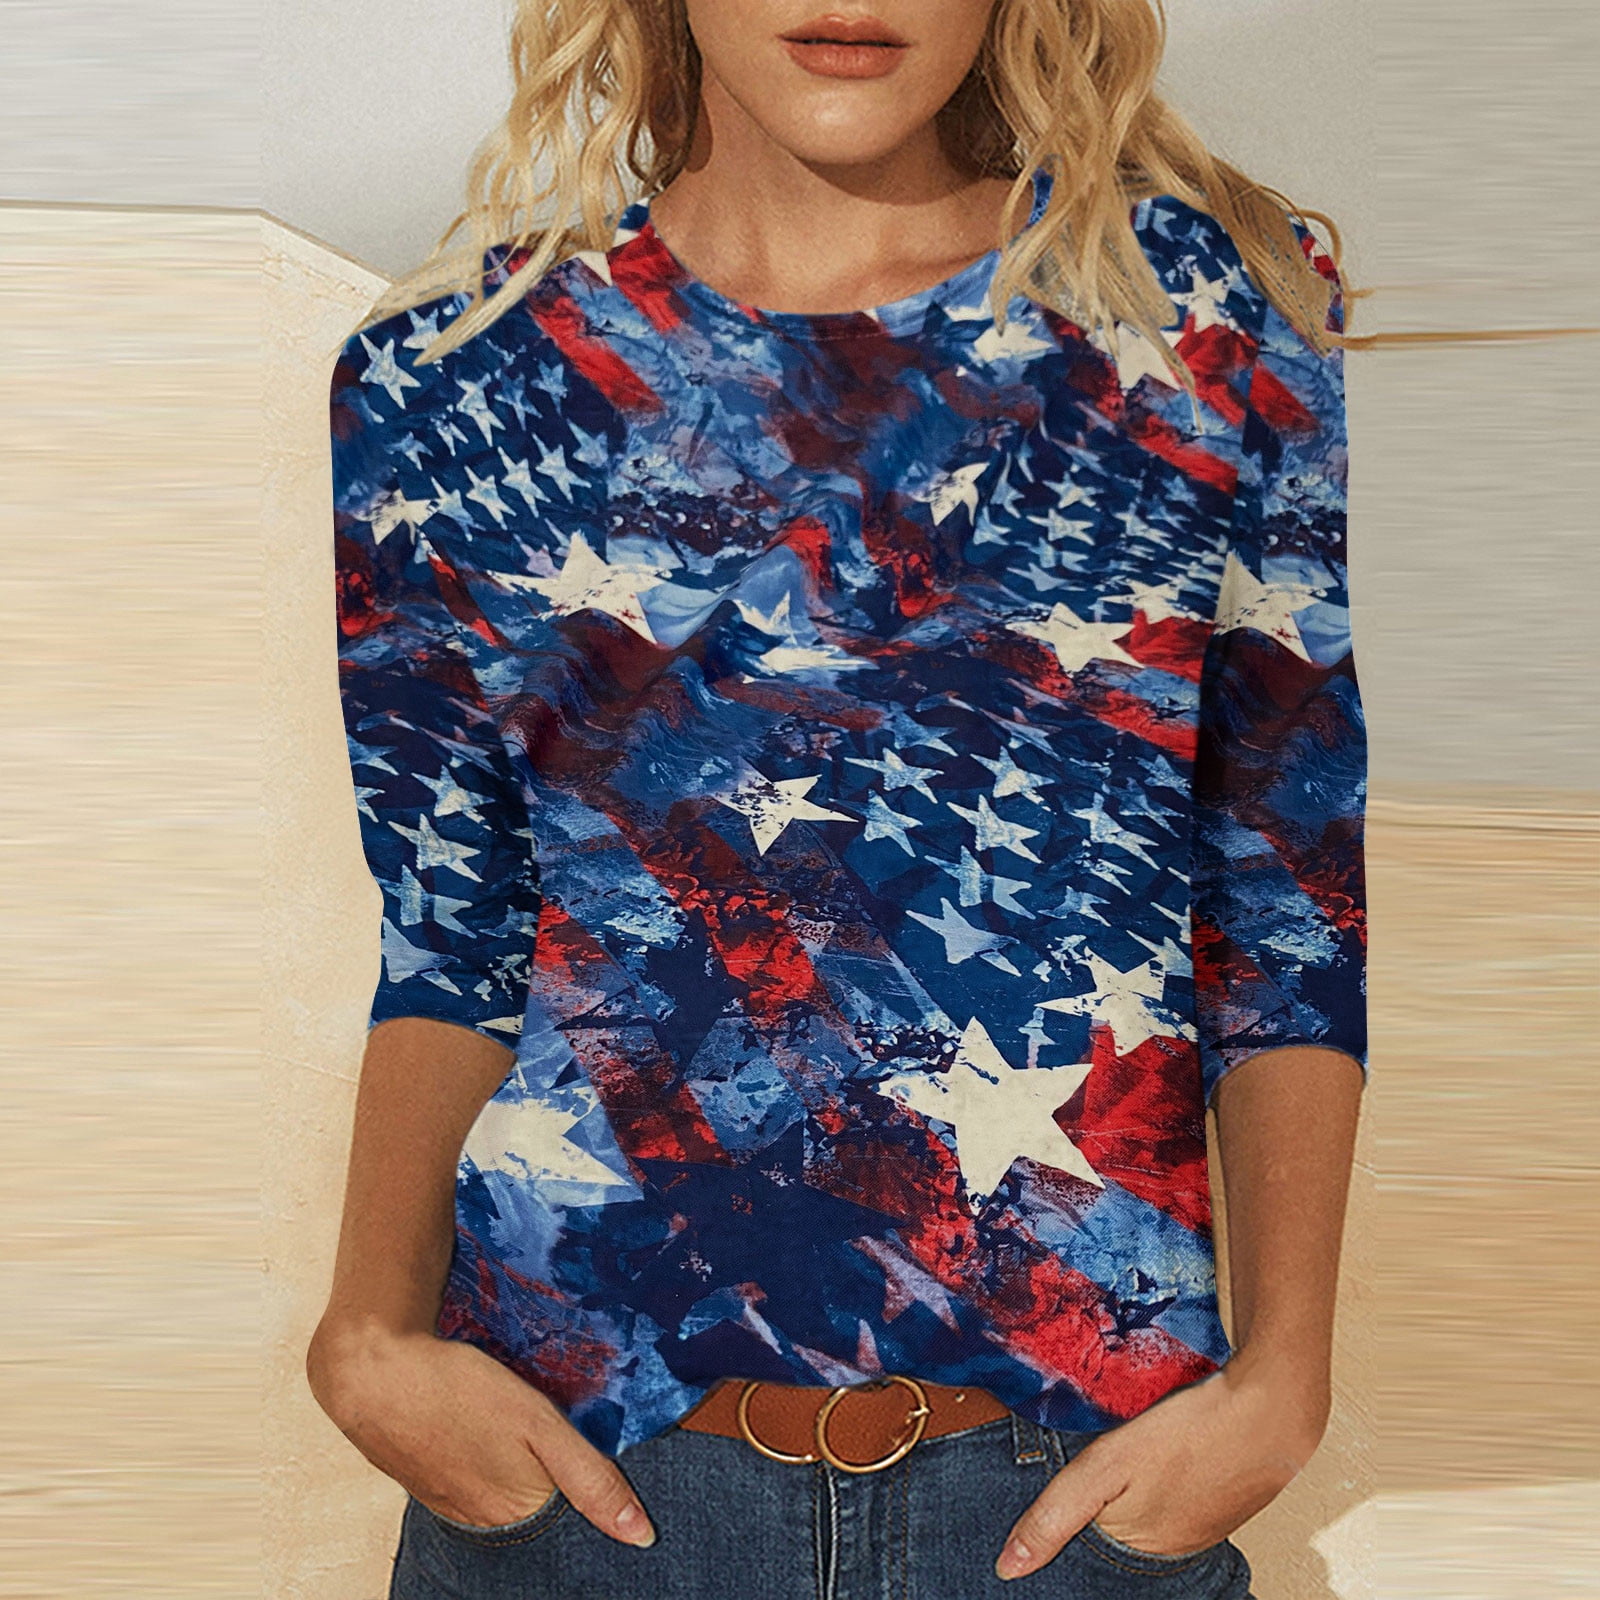 Womens Red White and Blue Shirts Women's Fashion 3/4 Sleeve Retro ...